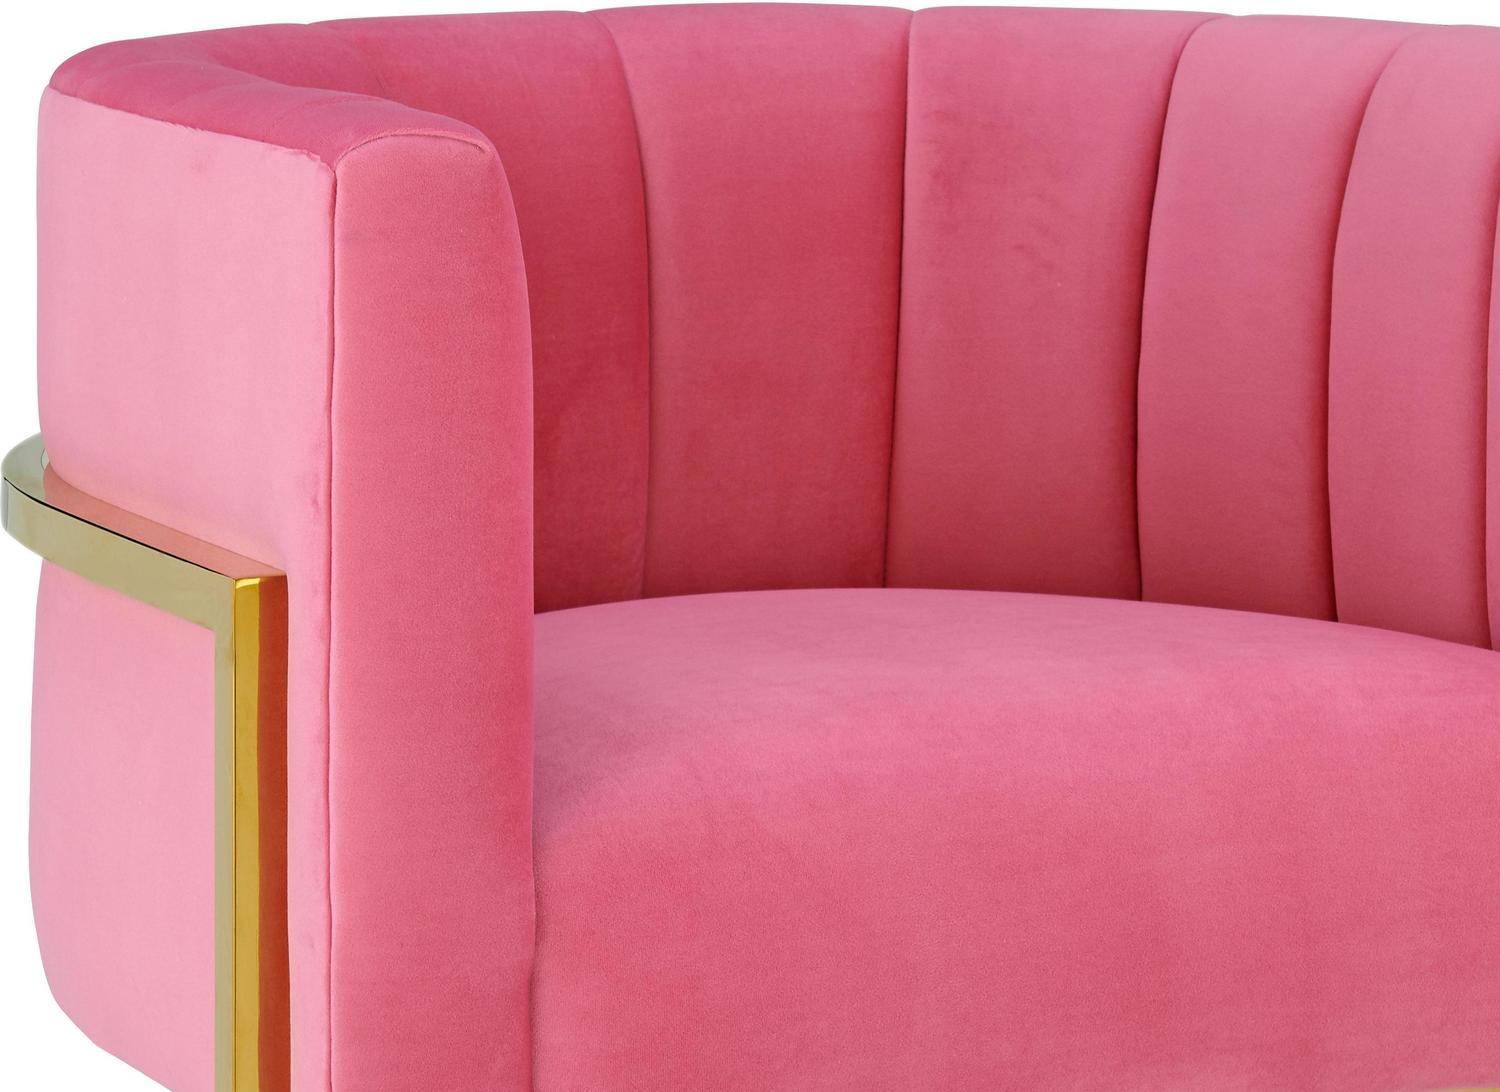 buy arm chairs Contemporary Design Furniture Accent Chairs Pink